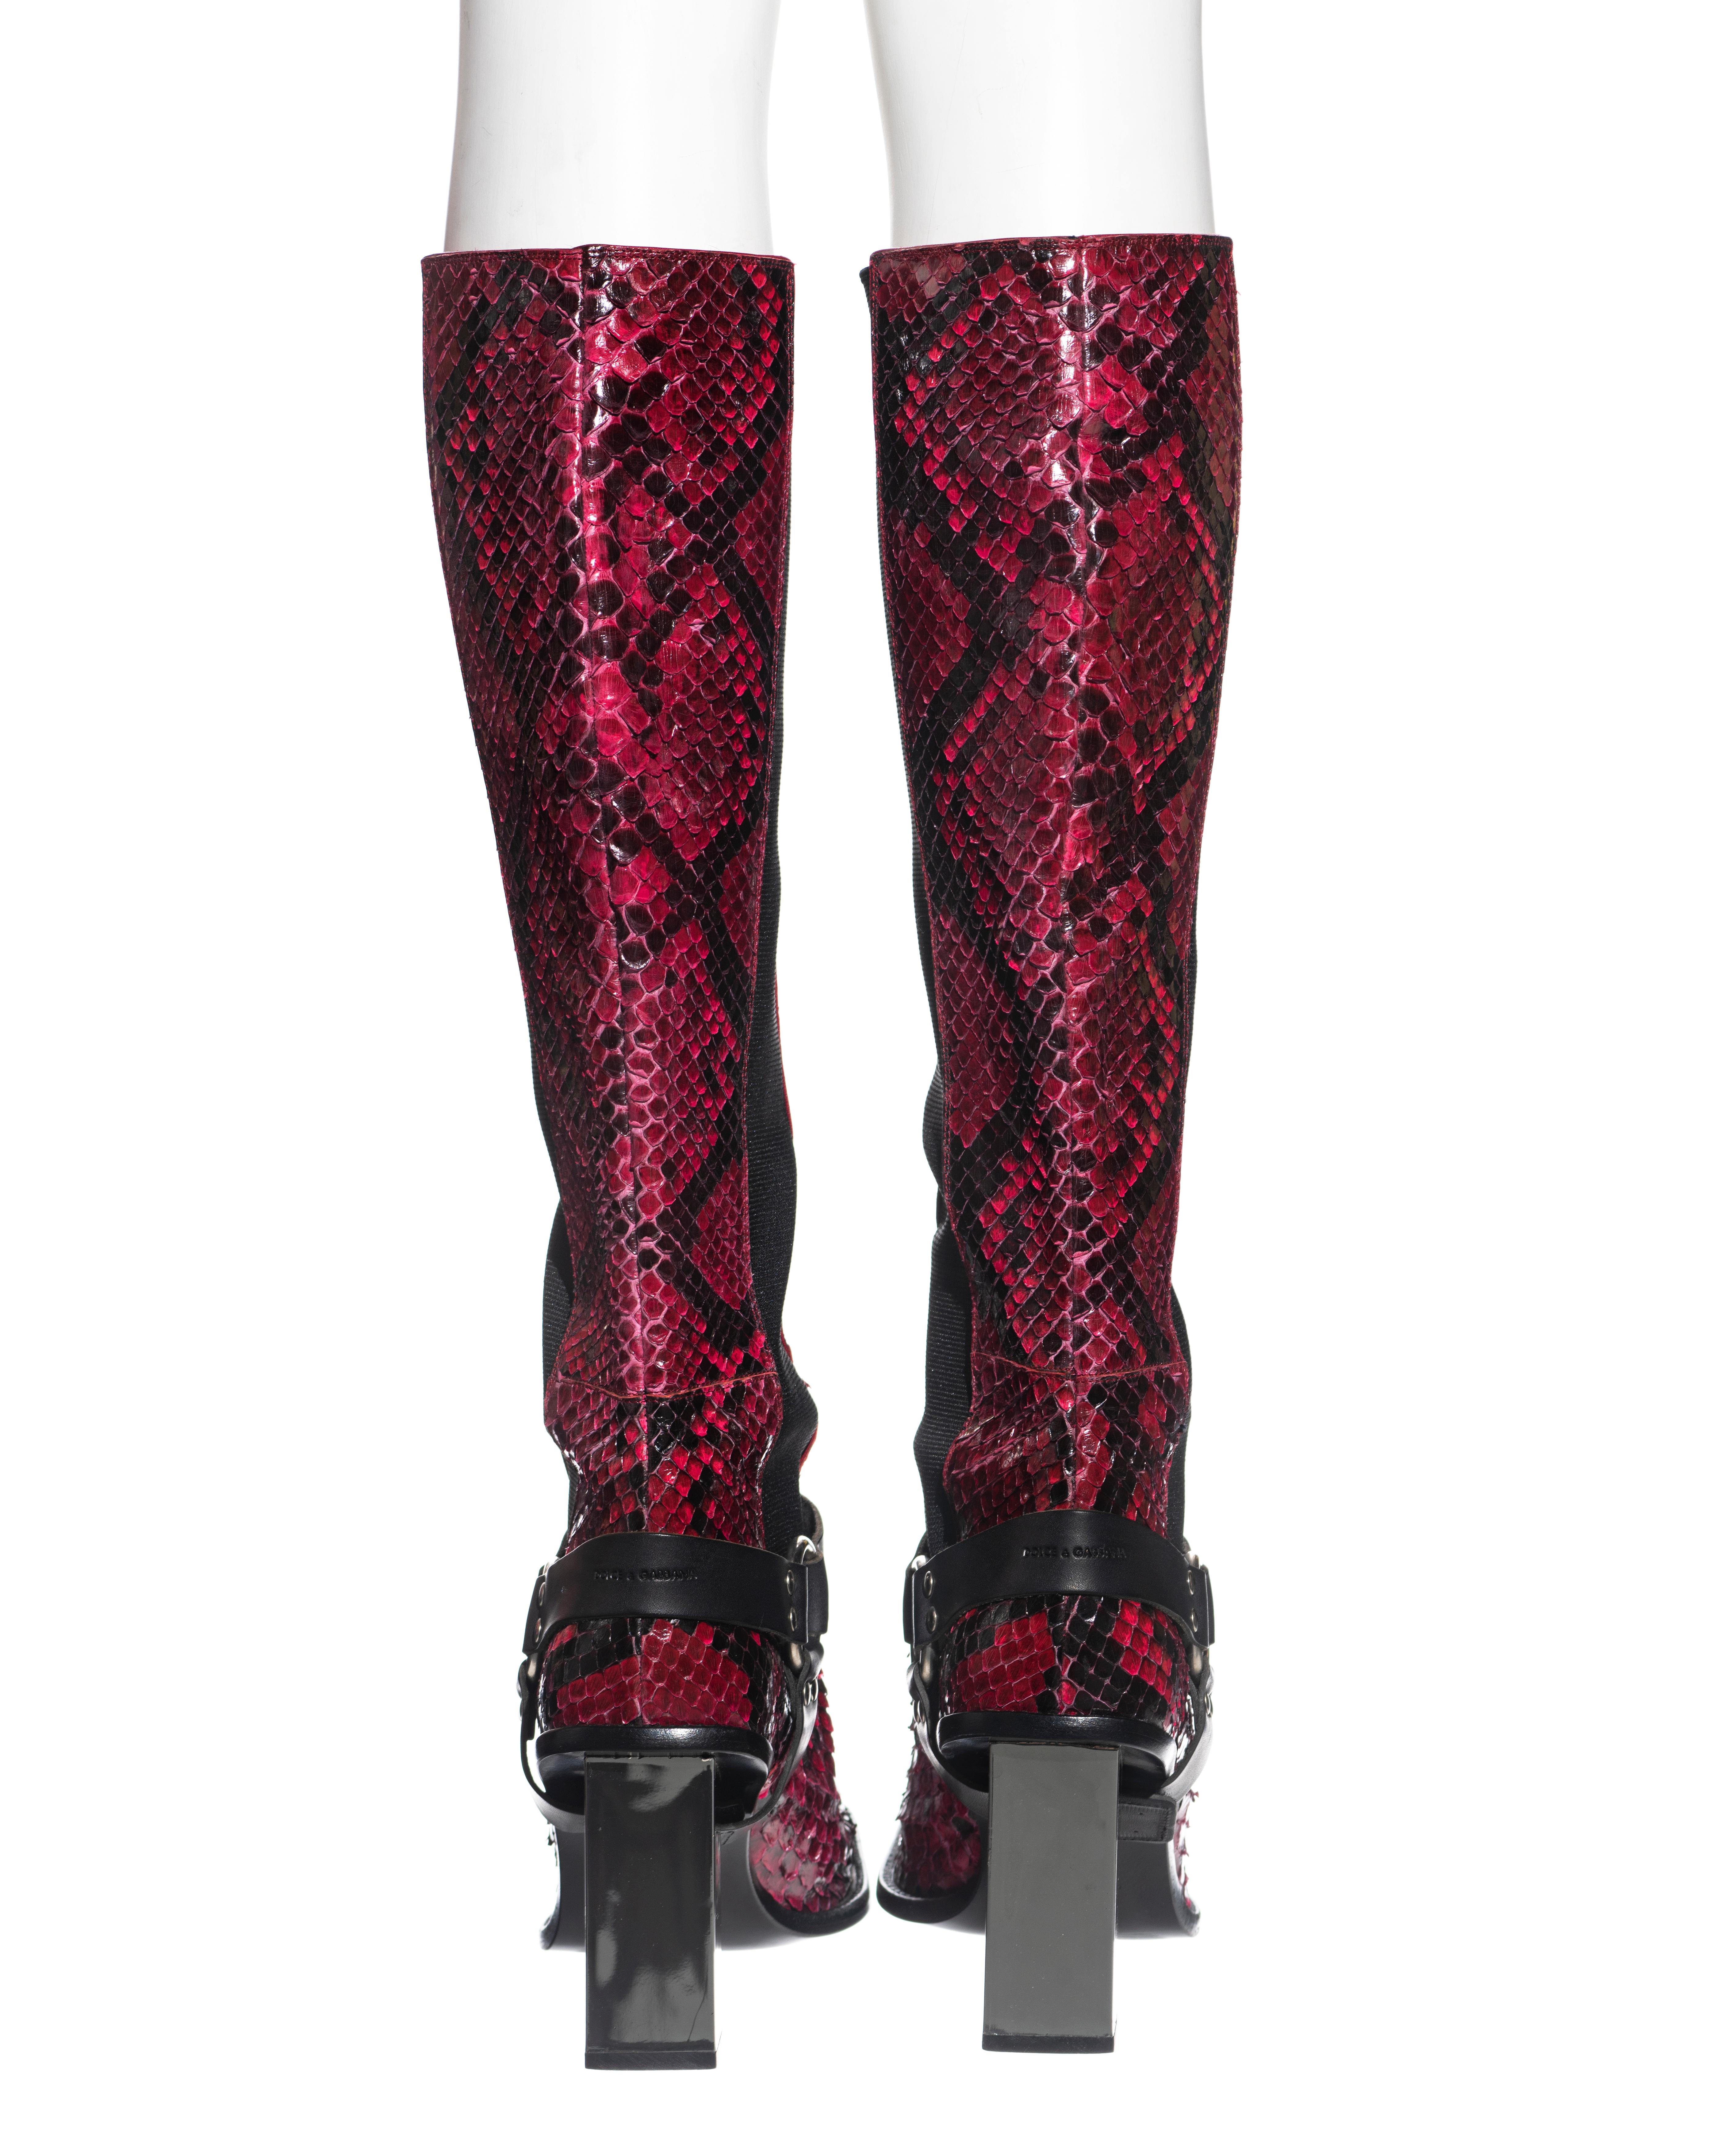 Dolce & Gabbana raspberry python boots with mirrored heels, fw 1999 For Sale 4